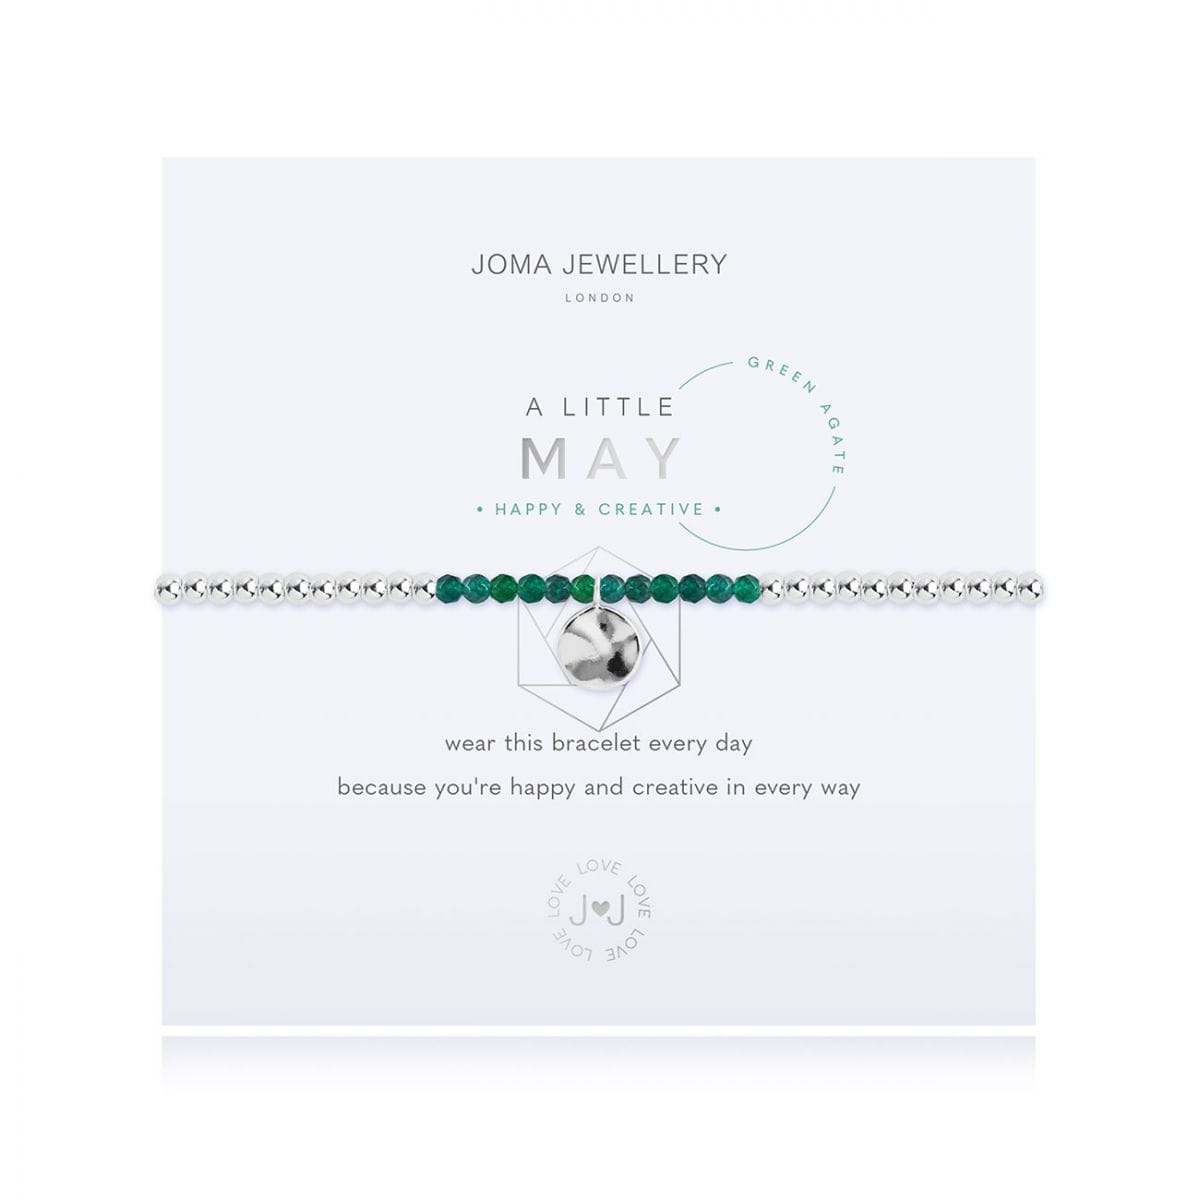 Joma Jewellery Bracelet Joma Jewellery Bracelet - A Little Birthstone - May - Green Agate